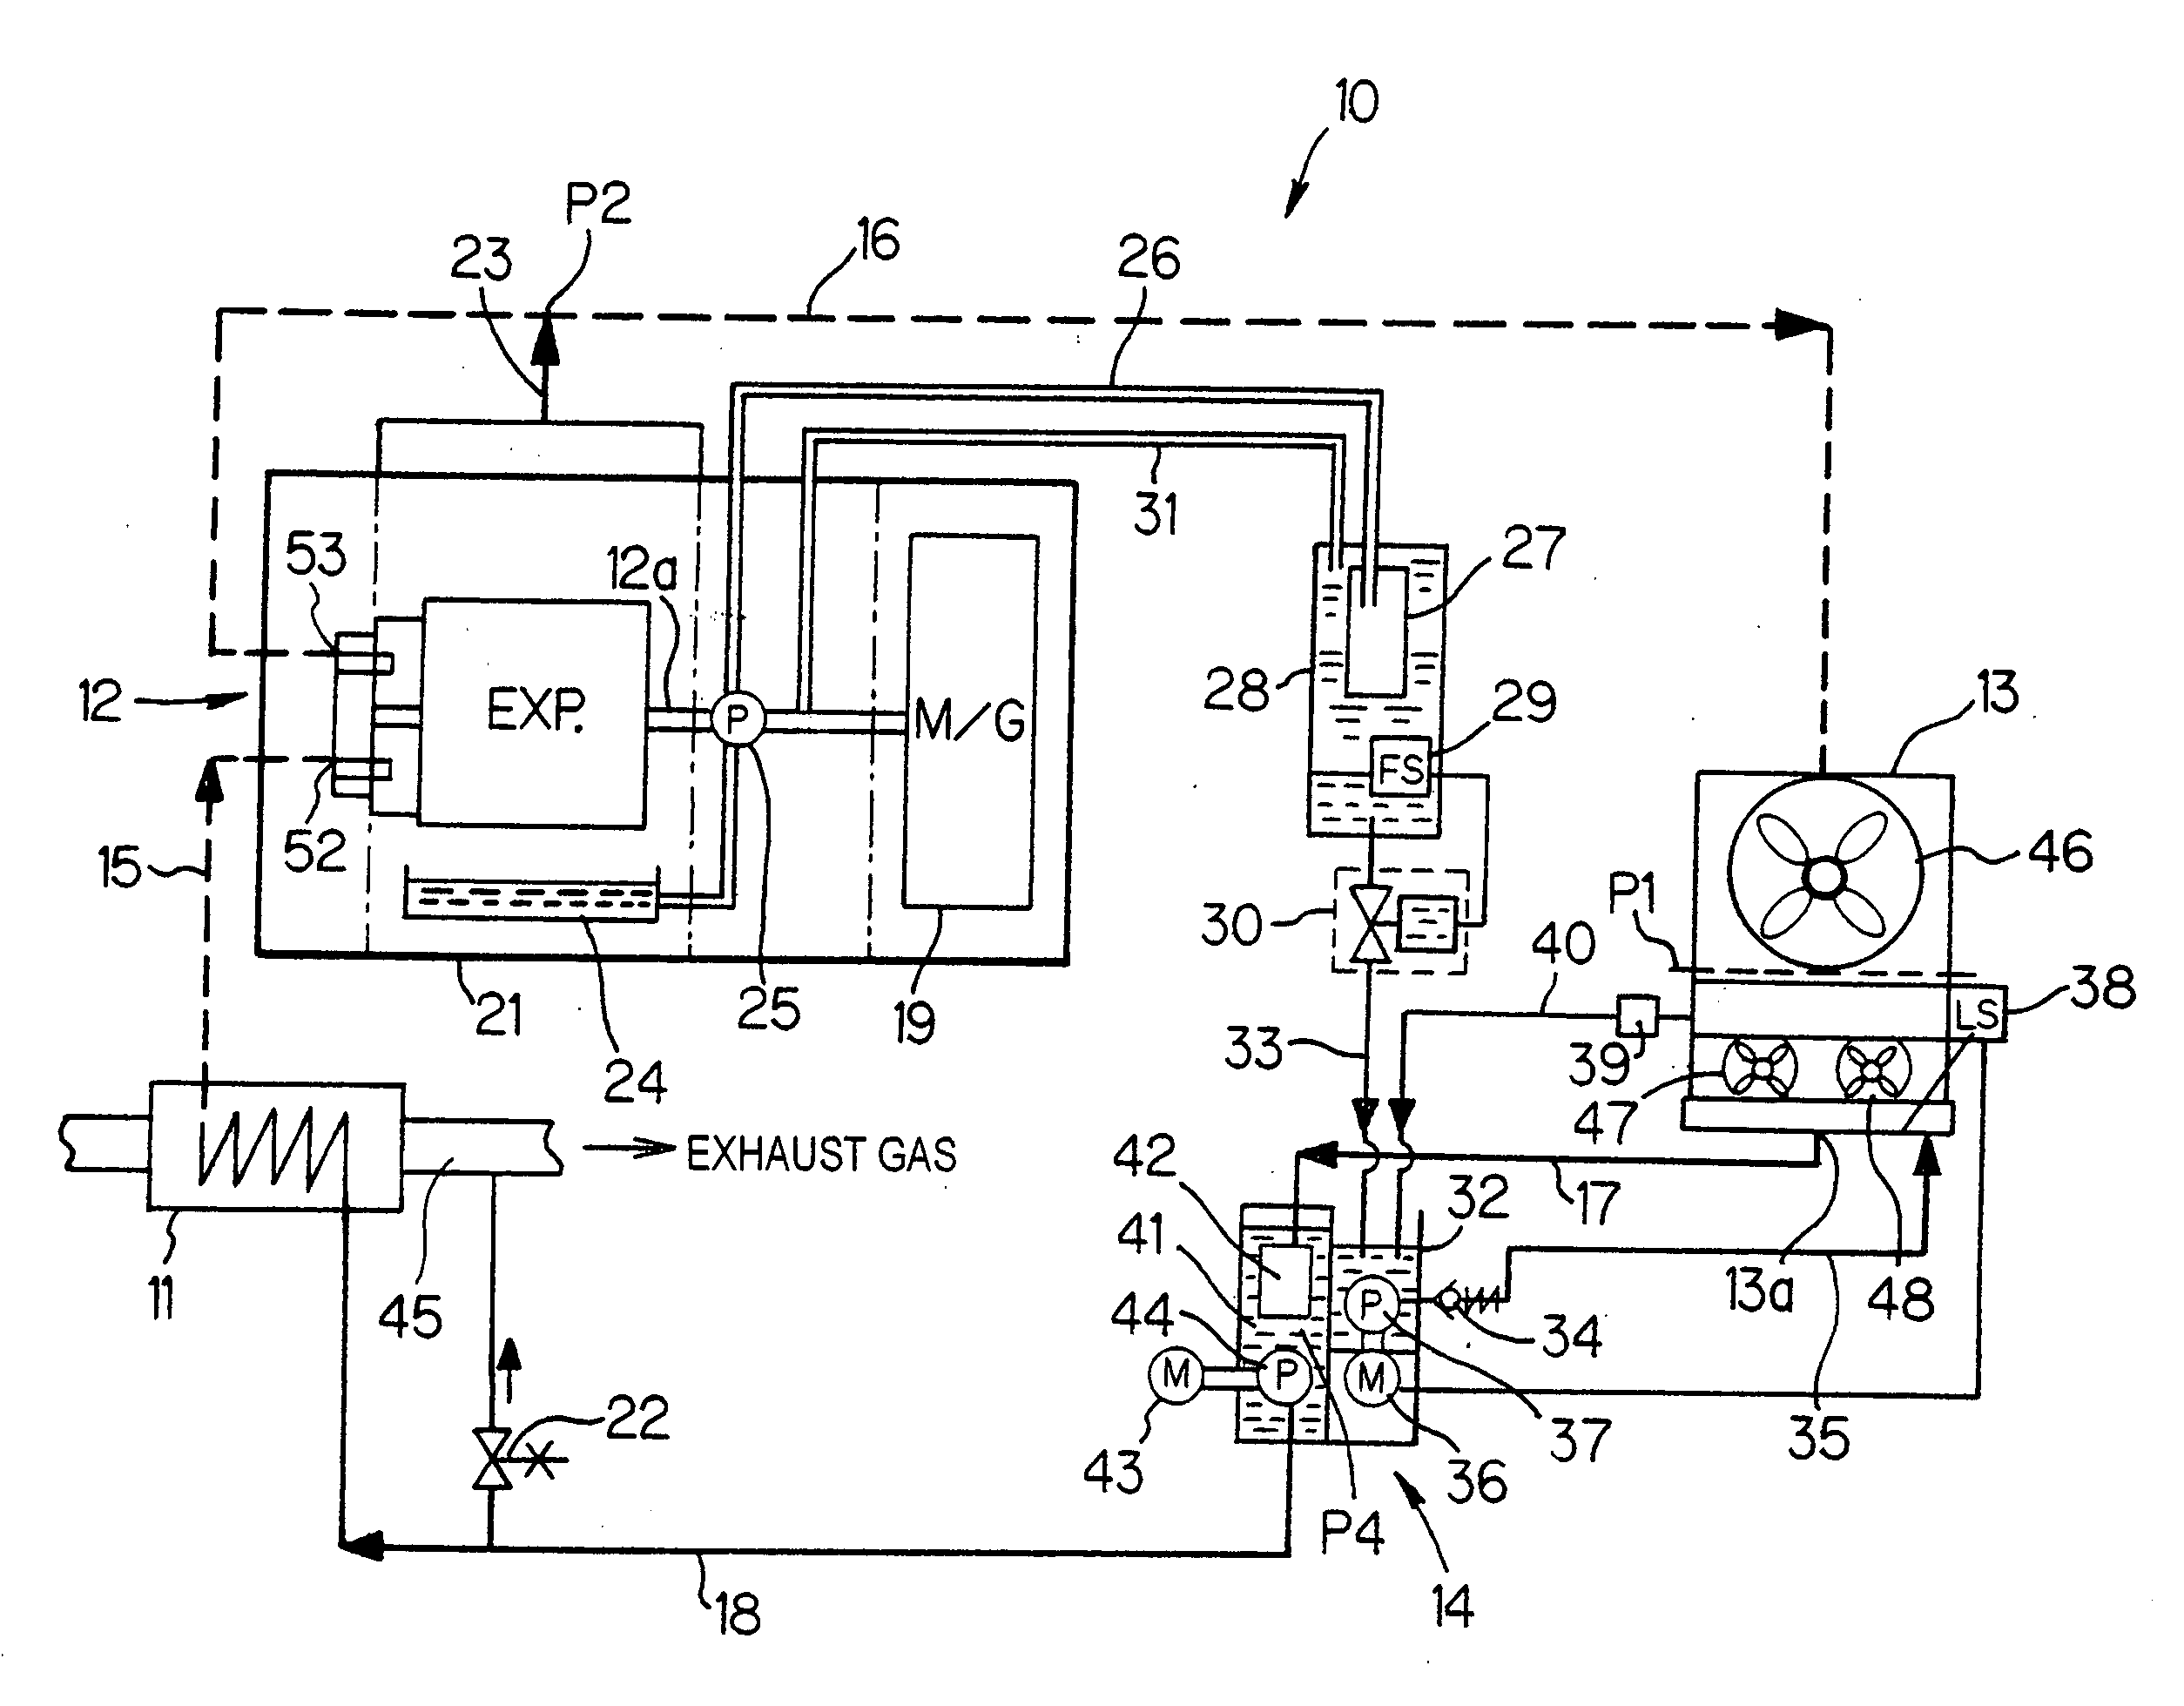 Device for controlling liquid level position within condenser in rankine cycle apparatus